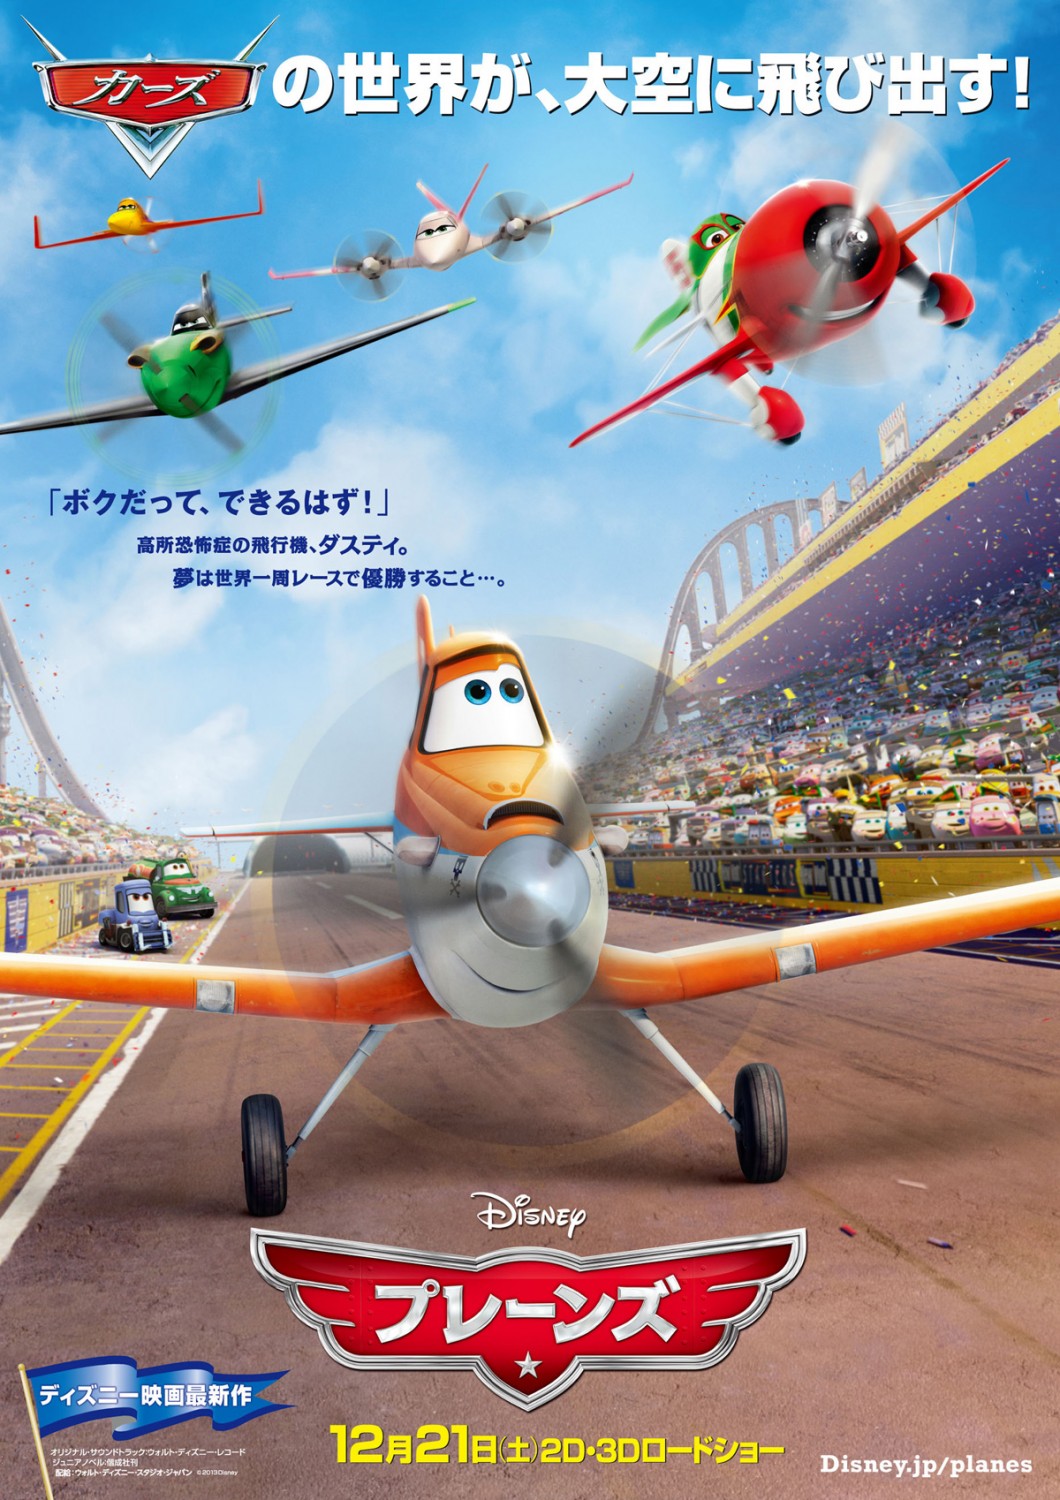 Extra Large Movie Poster Image for Planes (#7 of 17)